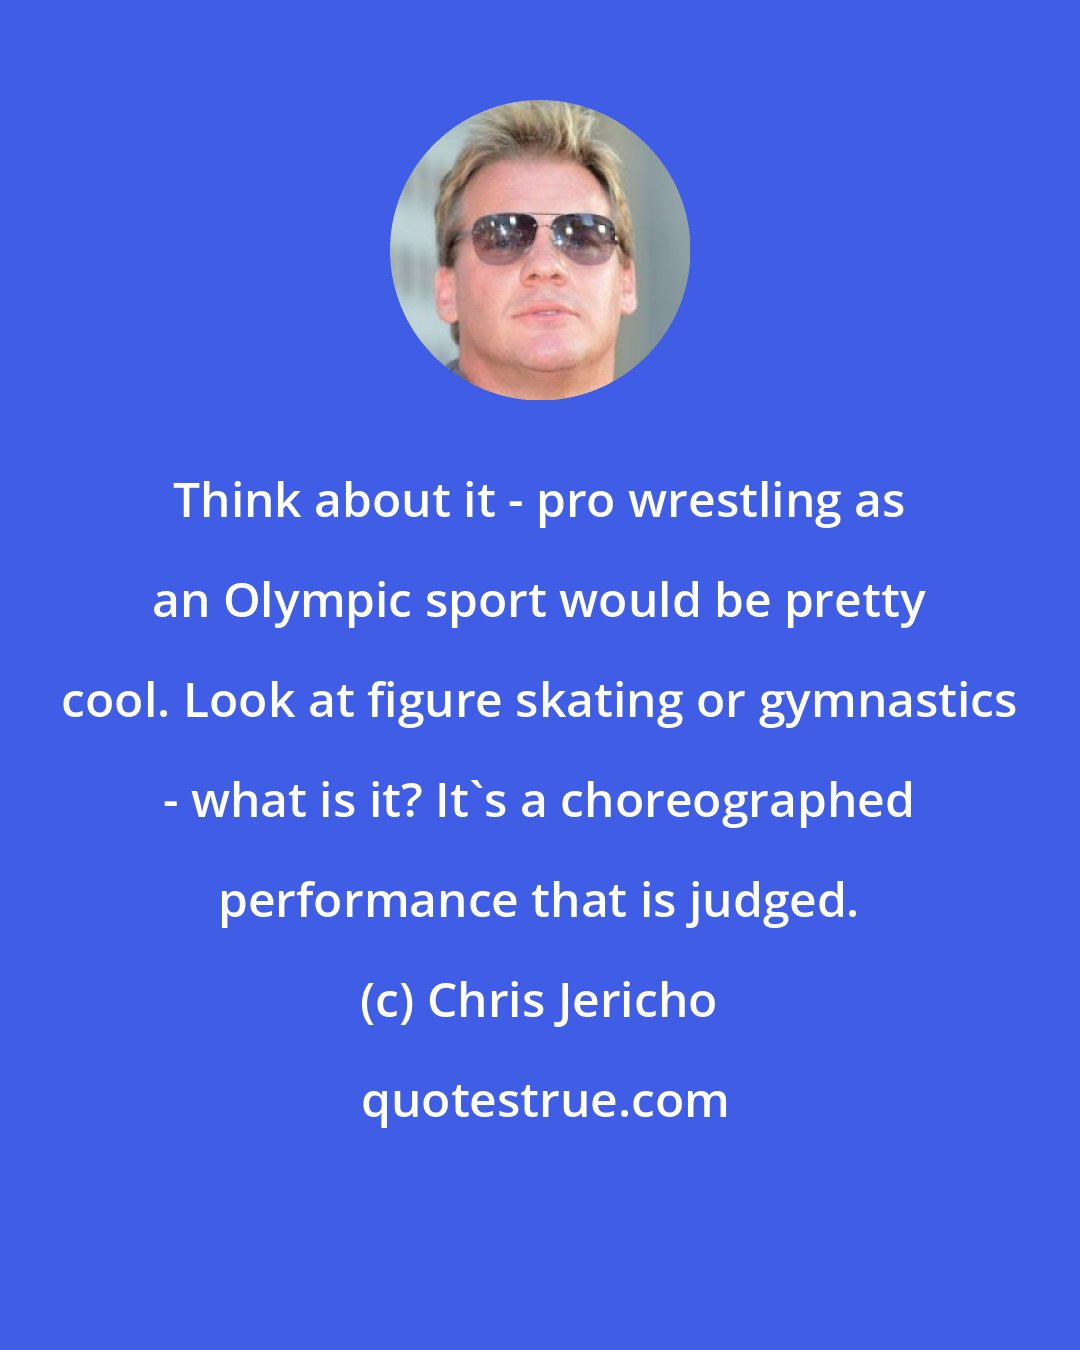 Chris Jericho: Think about it - pro wrestling as an Olympic sport would be pretty cool. Look at figure skating or gymnastics - what is it? It's a choreographed performance that is judged.